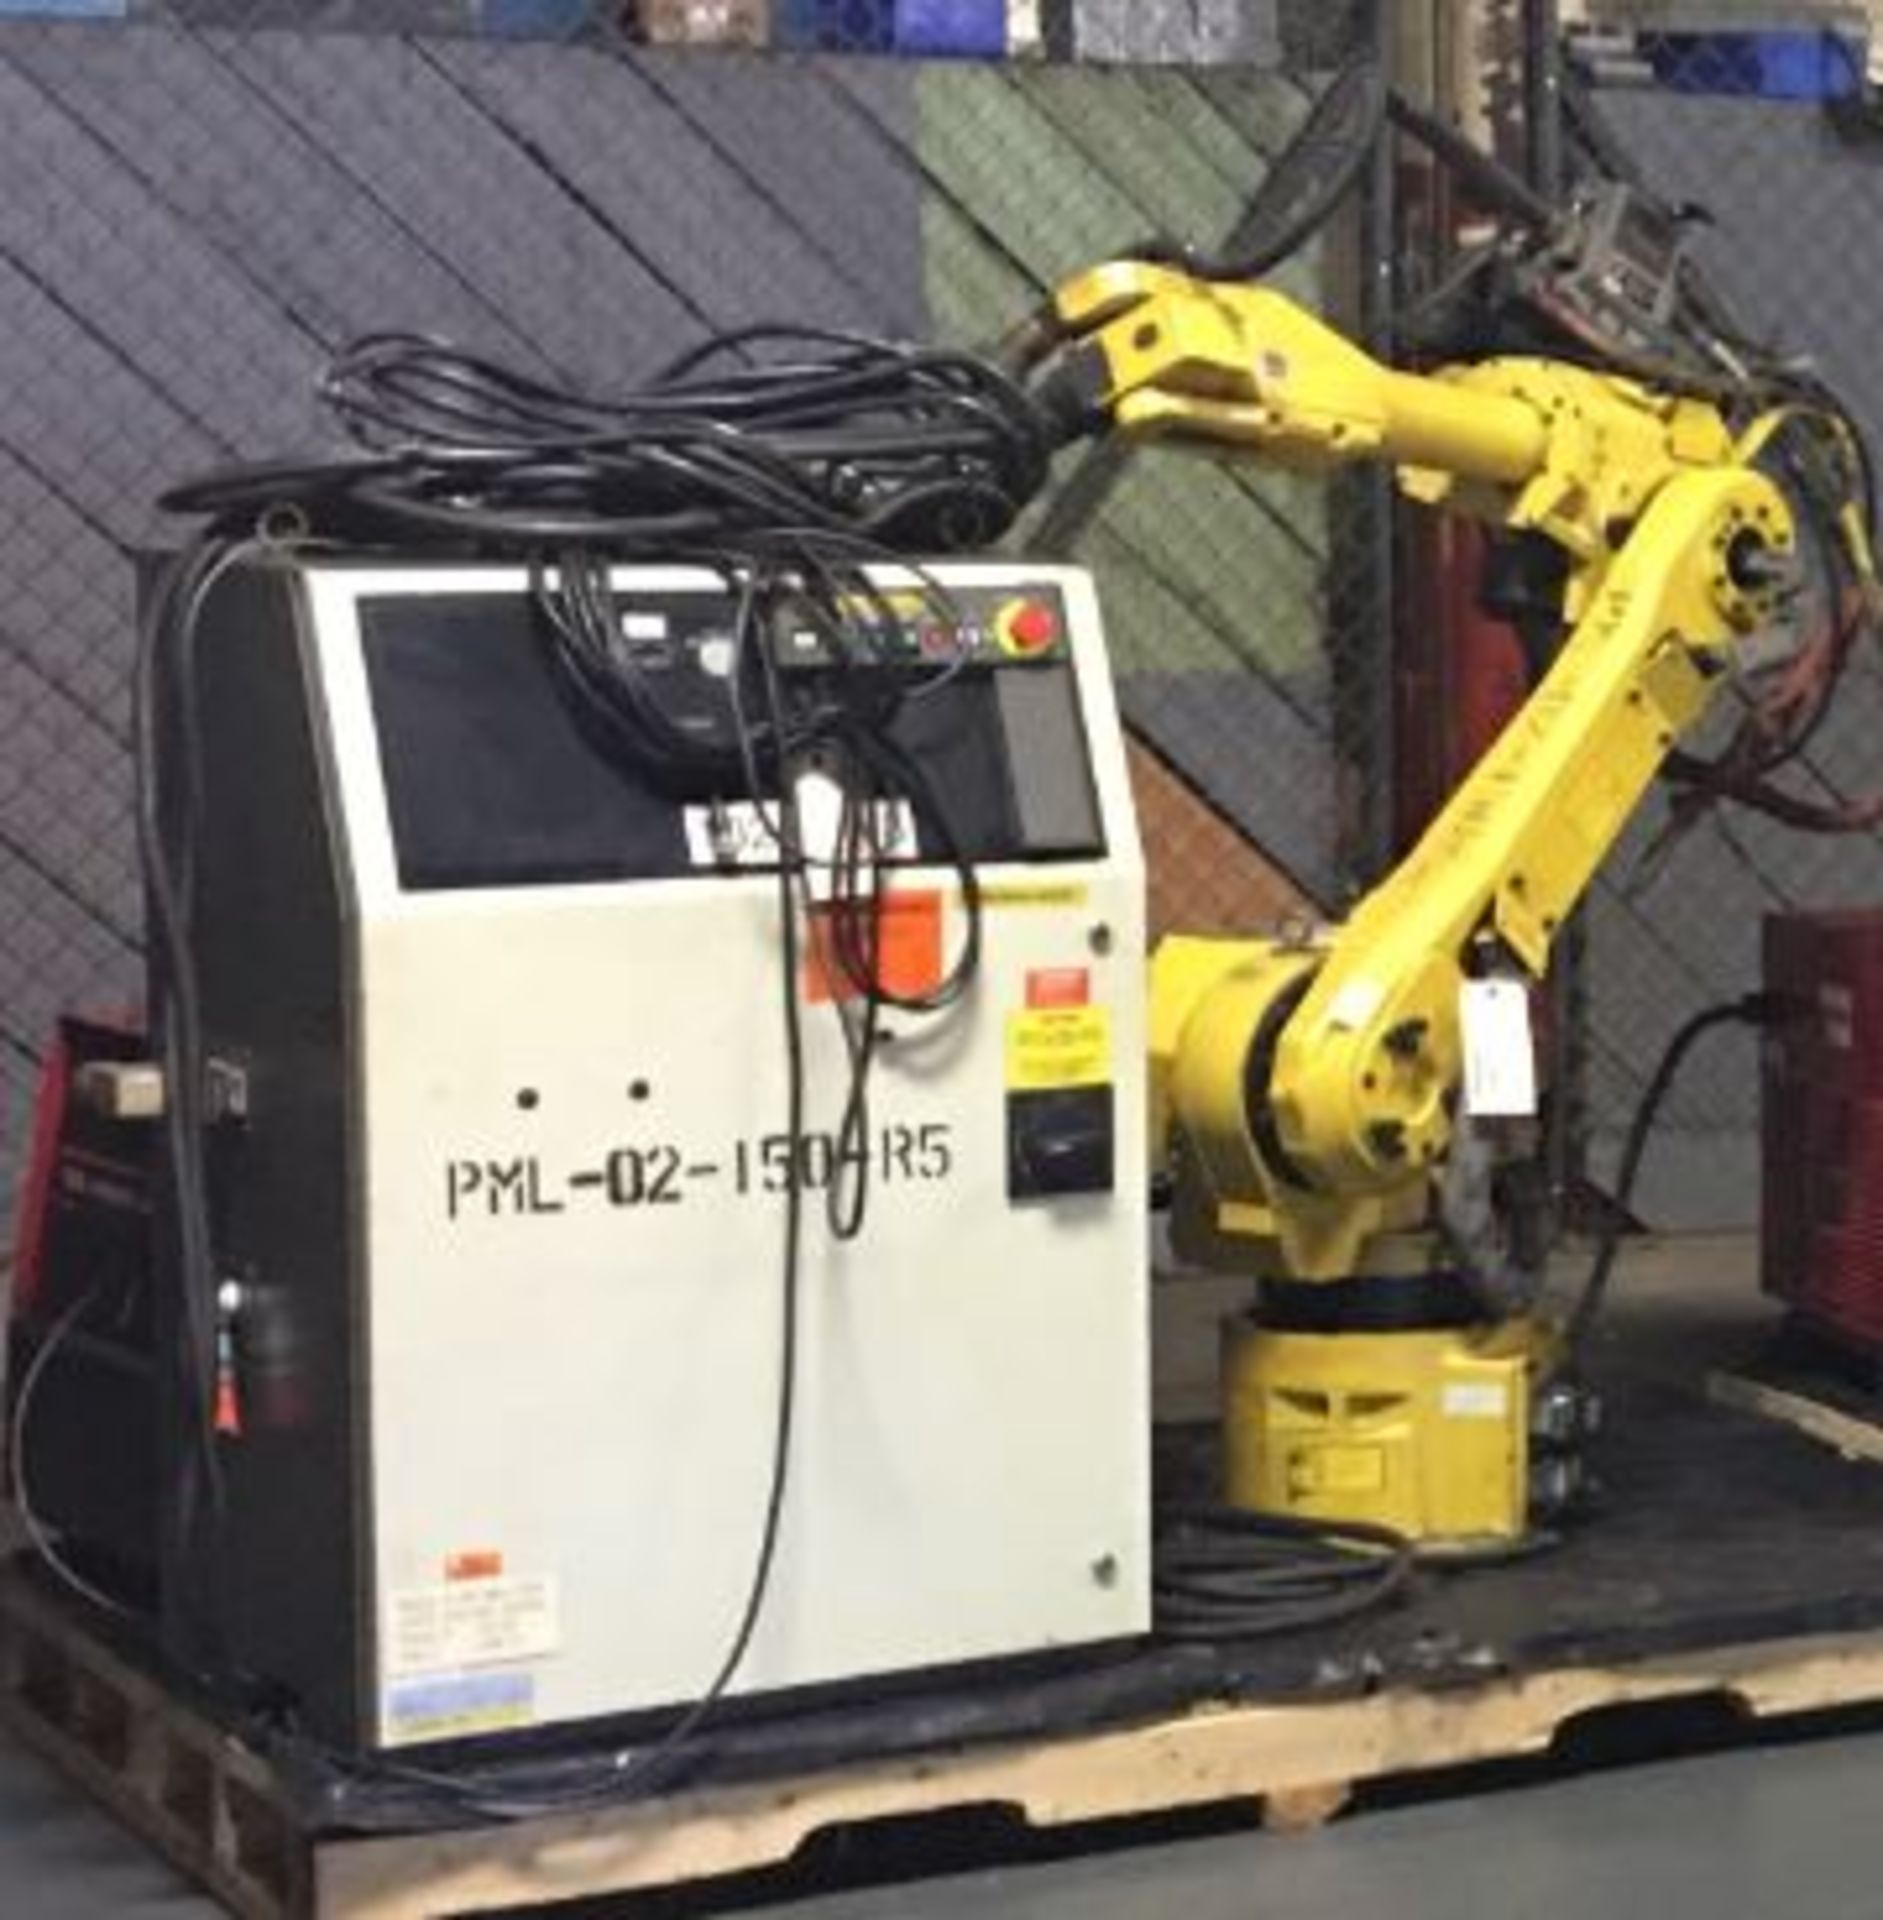 FANUC ARCMATE 120iB W/R-J3iB CONTROLS, CABLES, TEACH PENDANT AND LINCOLN POWERWAVE 455M POWER SUPPLY